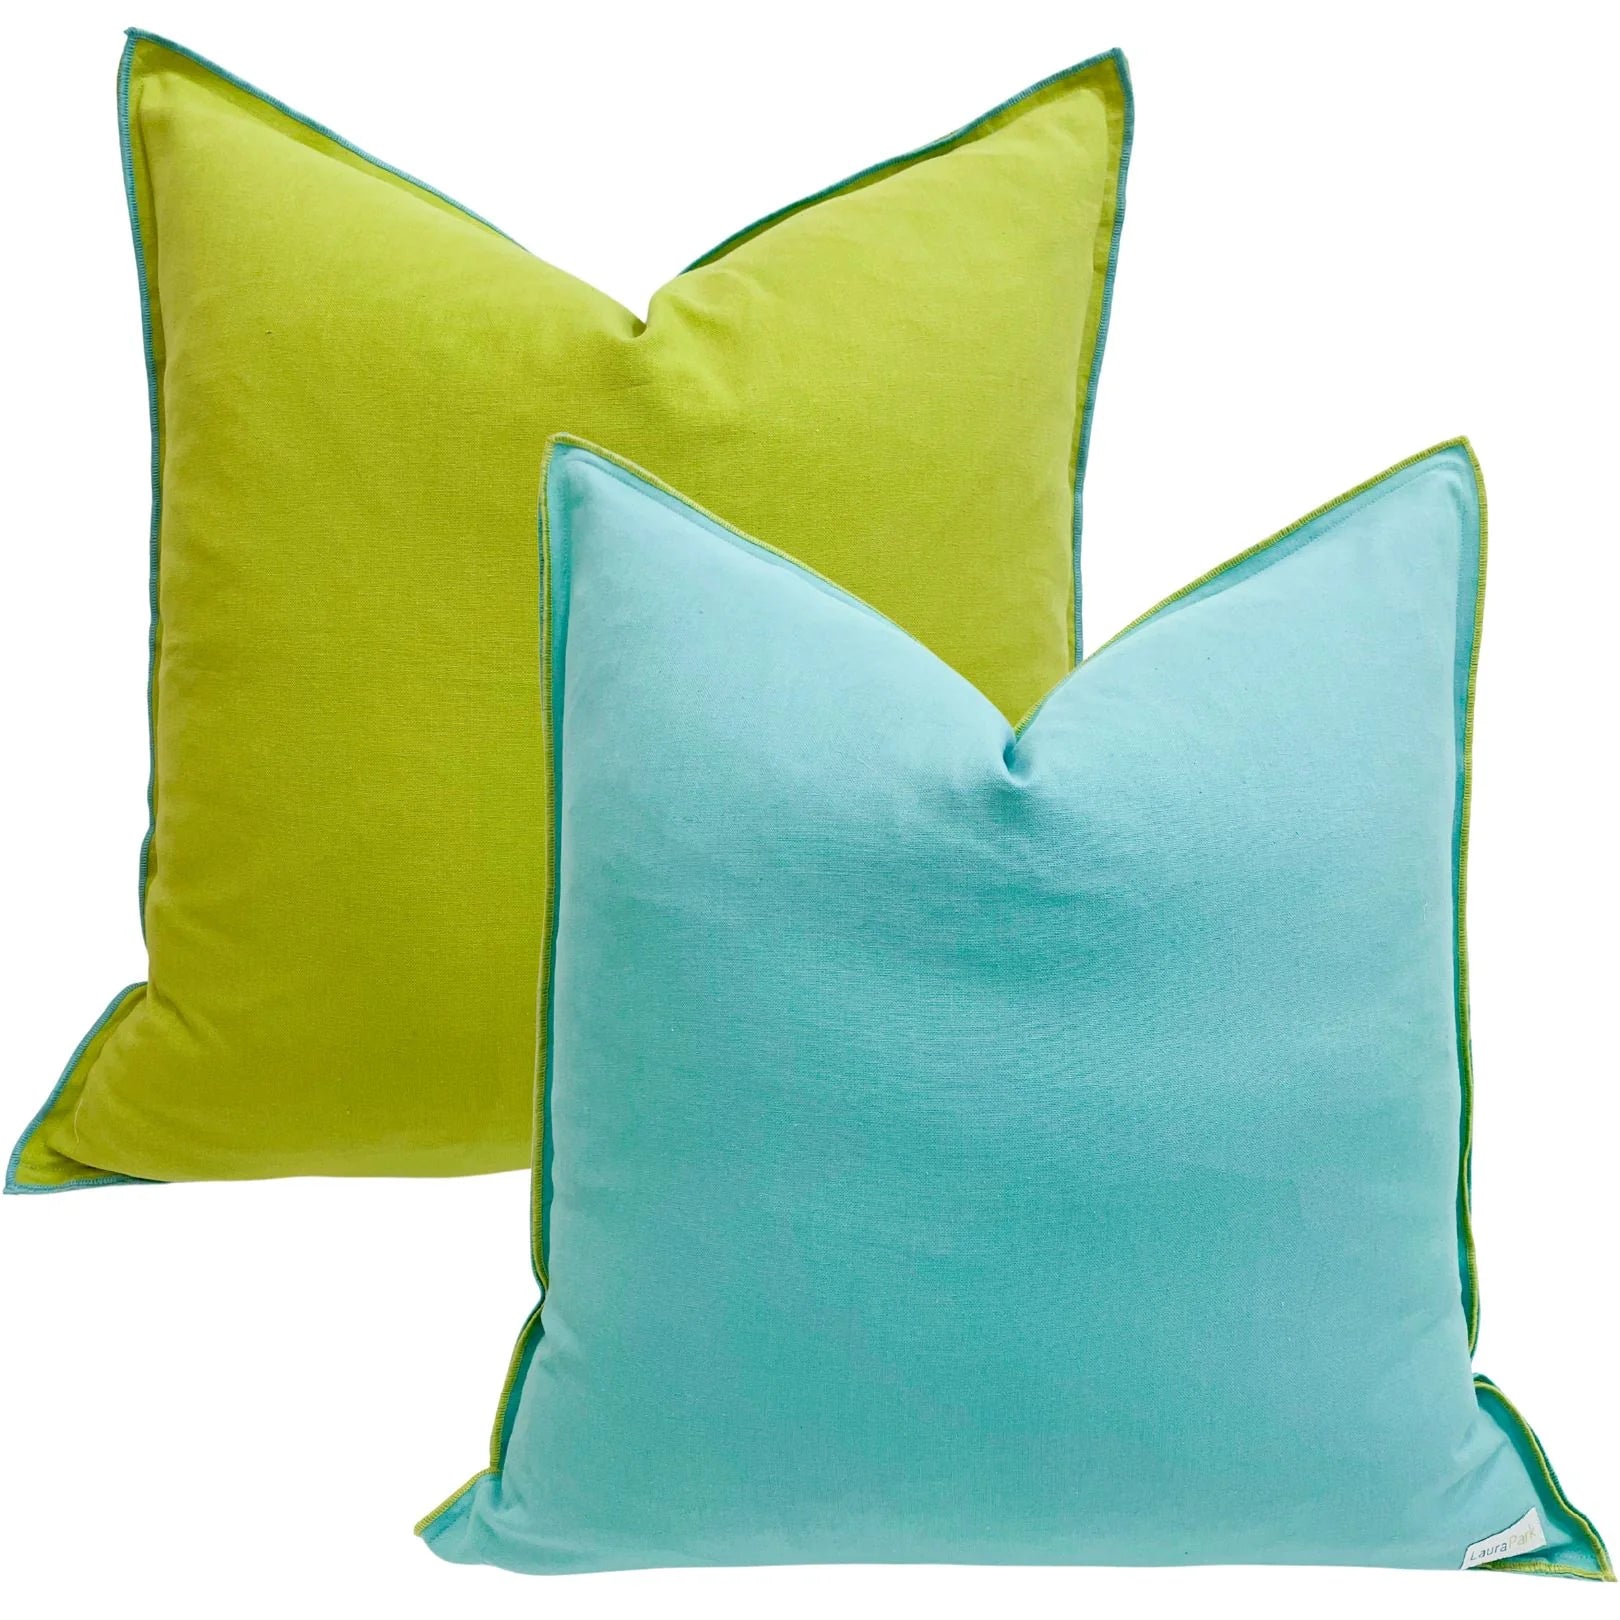 Laura Park Blue/Green Two-Toned Decorative Pillow, 22